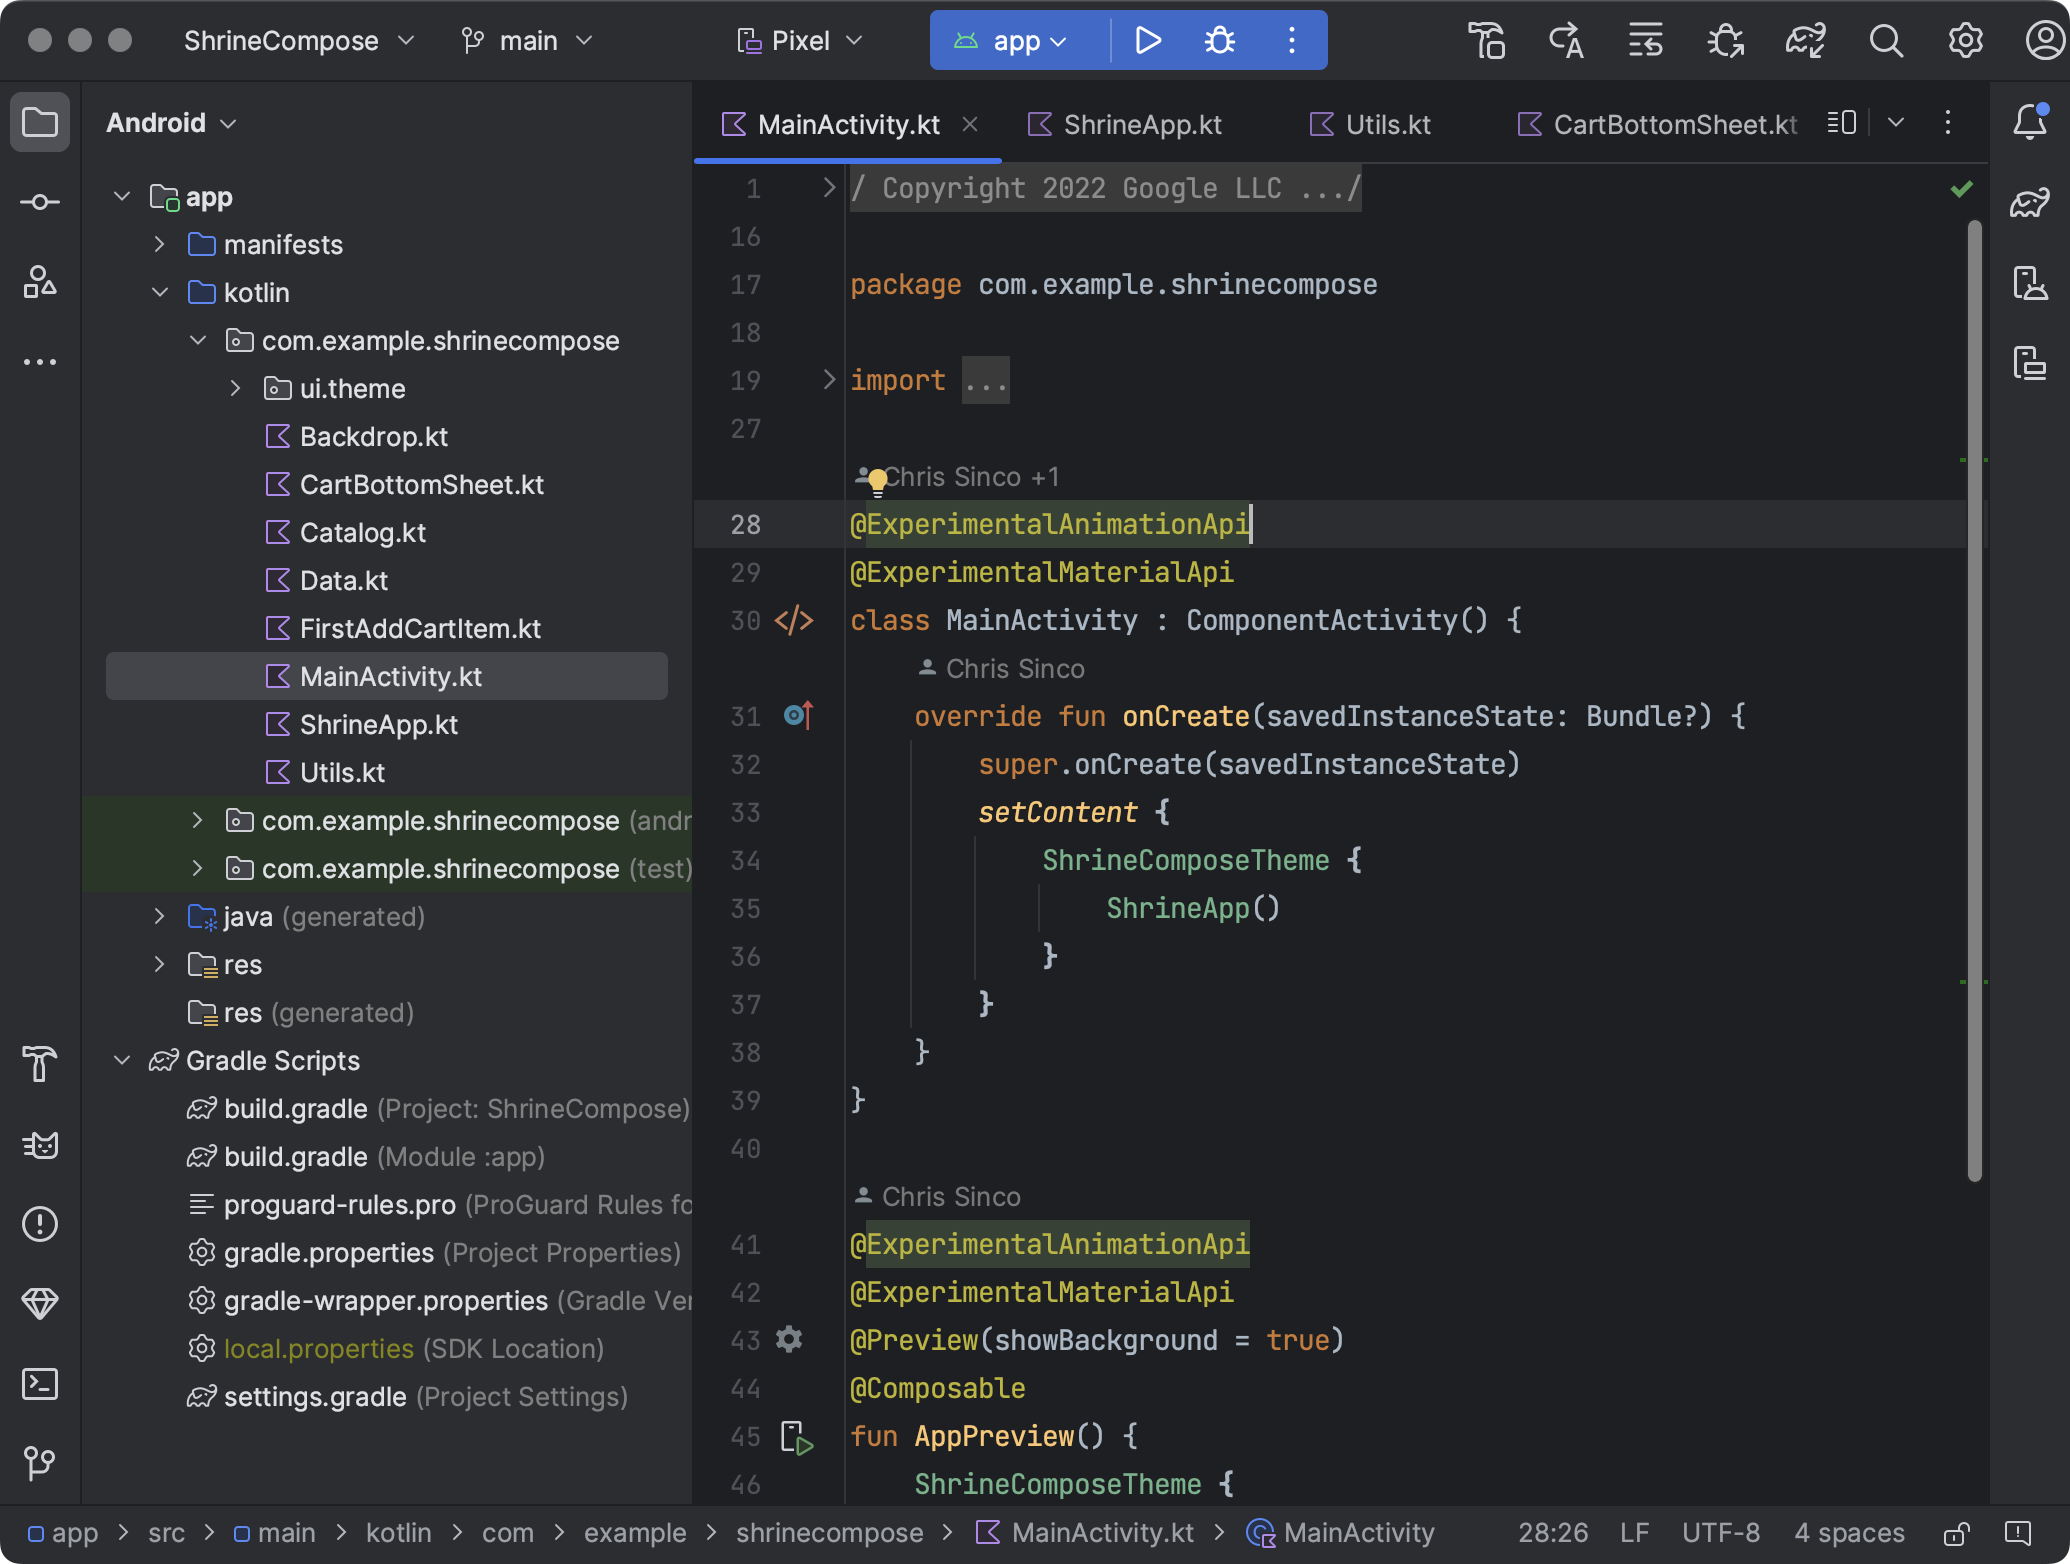 Android Studio 2022.3.1.22 for windows download